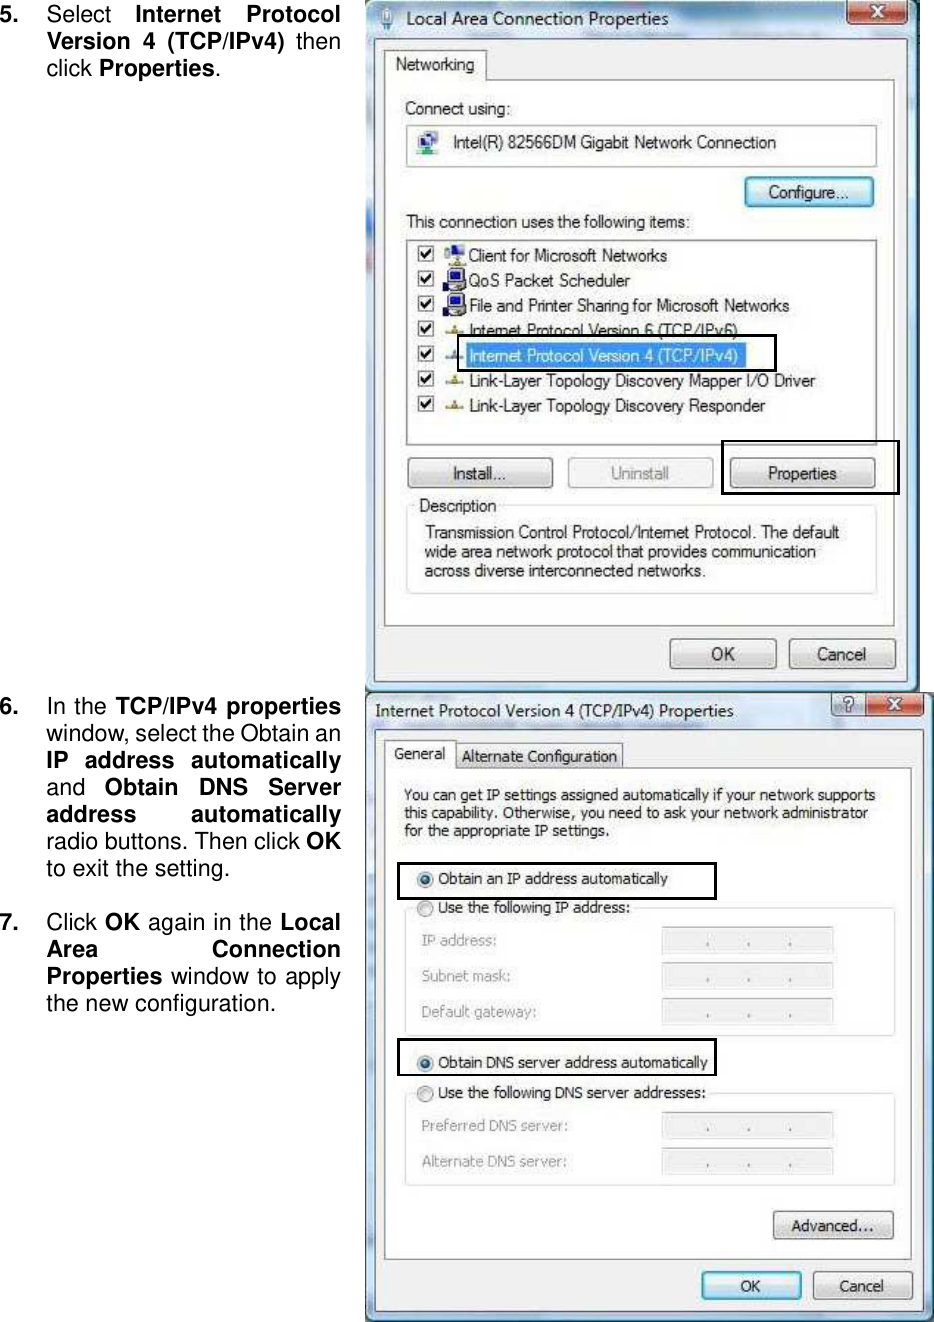   5.  Select  Internet  Protocol Version  4  (TCP/IPv4)  then click Properties.  6. In the TCP/IPv4 properties window, select the Obtain an IP  address  automatically and  Obtain  DNS  Server address  automatically radio buttons. Then click OK to exit the setting.  7.  Click OK again in the Local Area  Connection Properties window to apply the new configuration.  